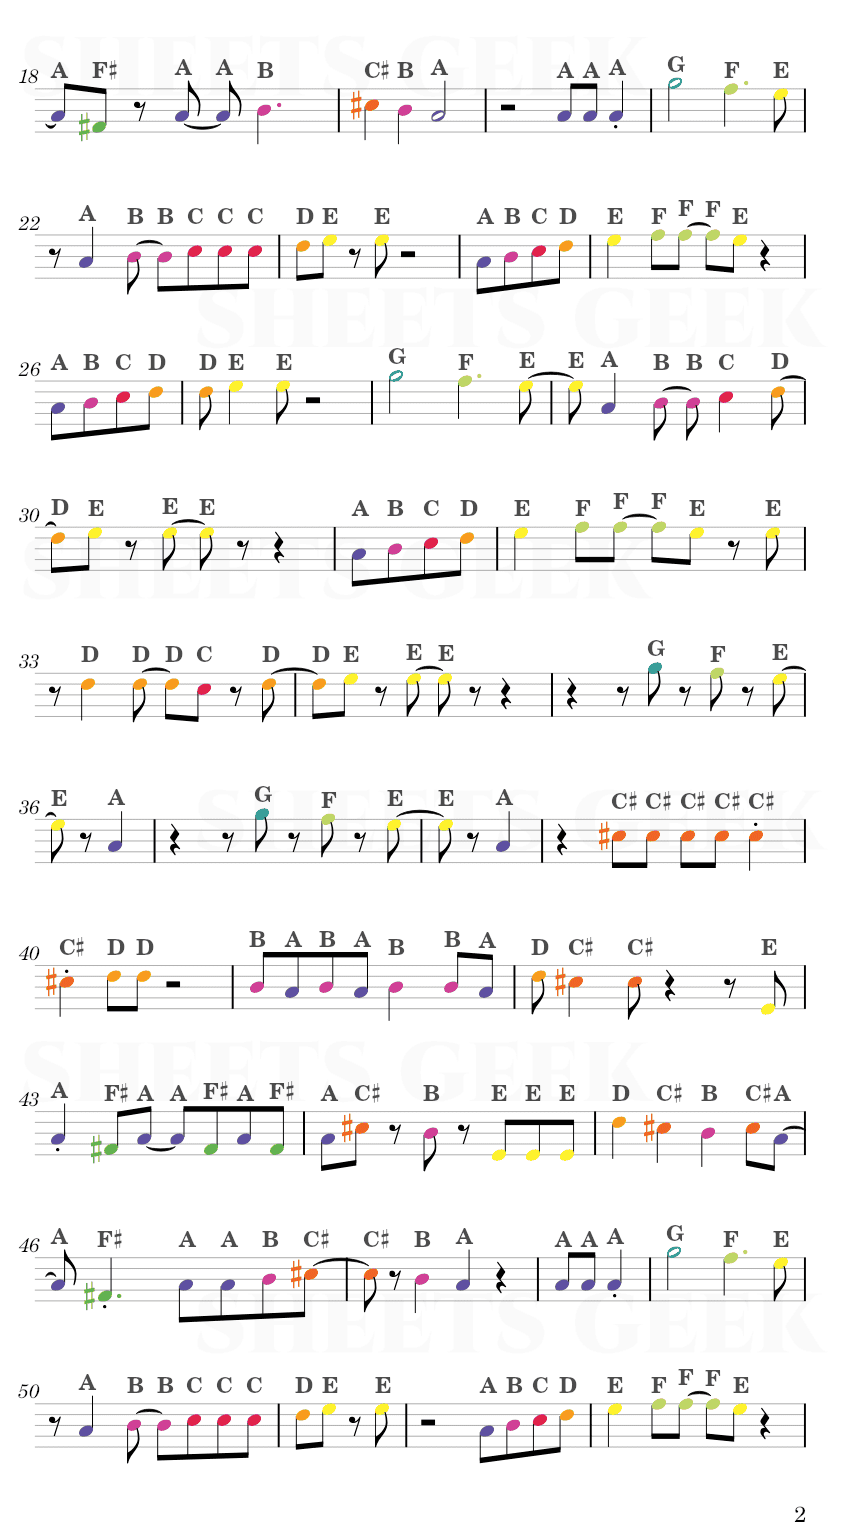 I'm Still Standing - Elton John Easy Sheet Music Free for piano, keyboard, flute, violin, sax, cello page 2